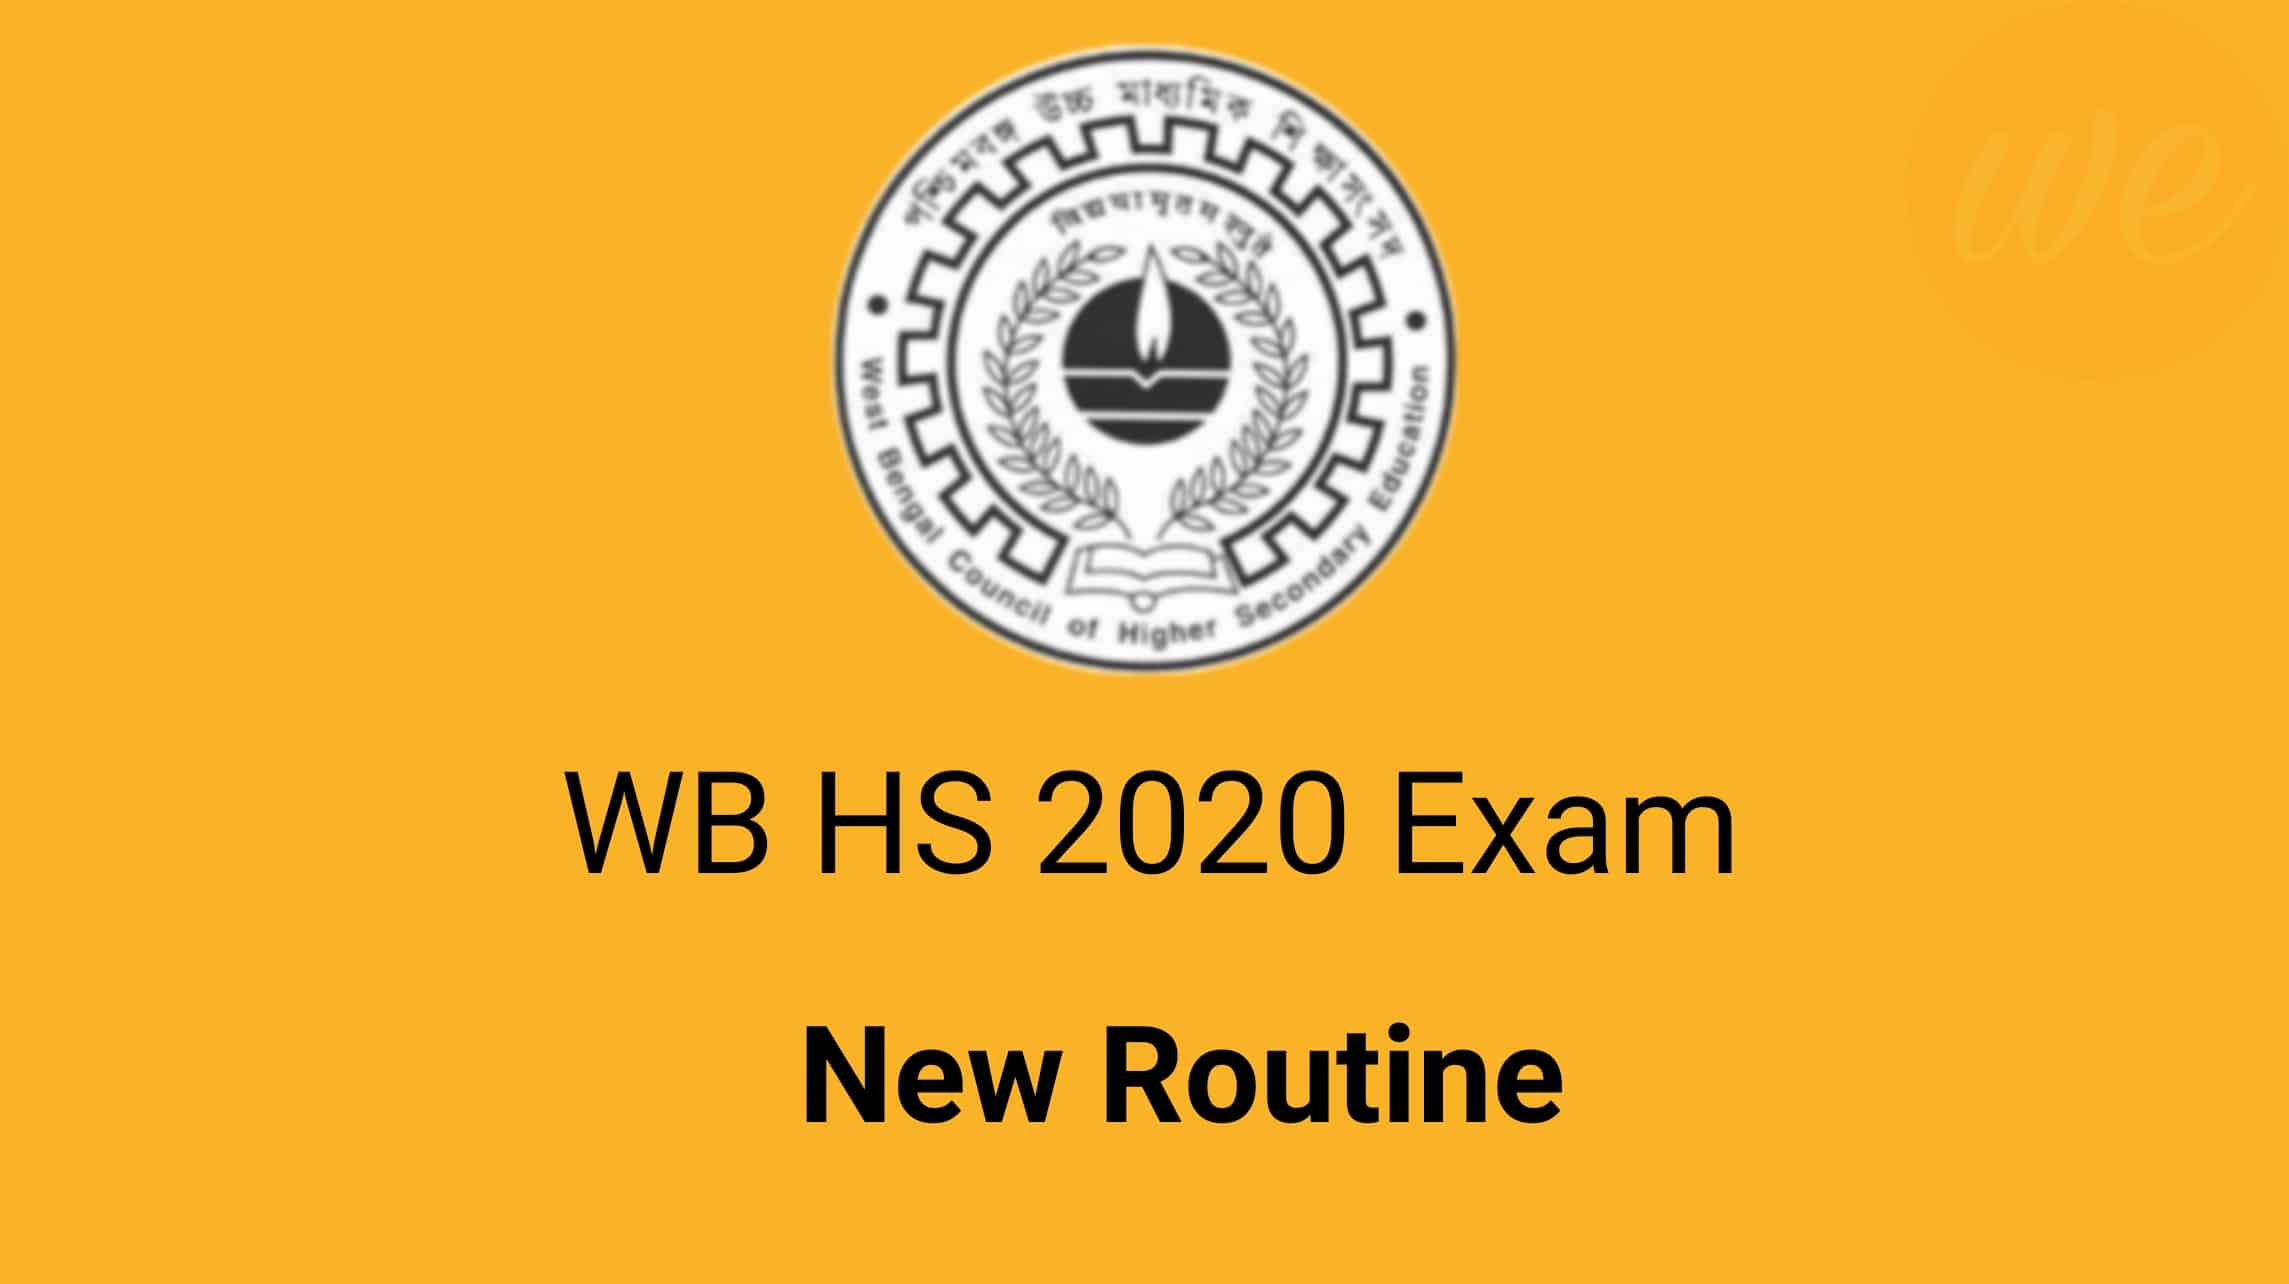 West Bengal HS 2020 New Exam Dates Announced for the remanning Subjects